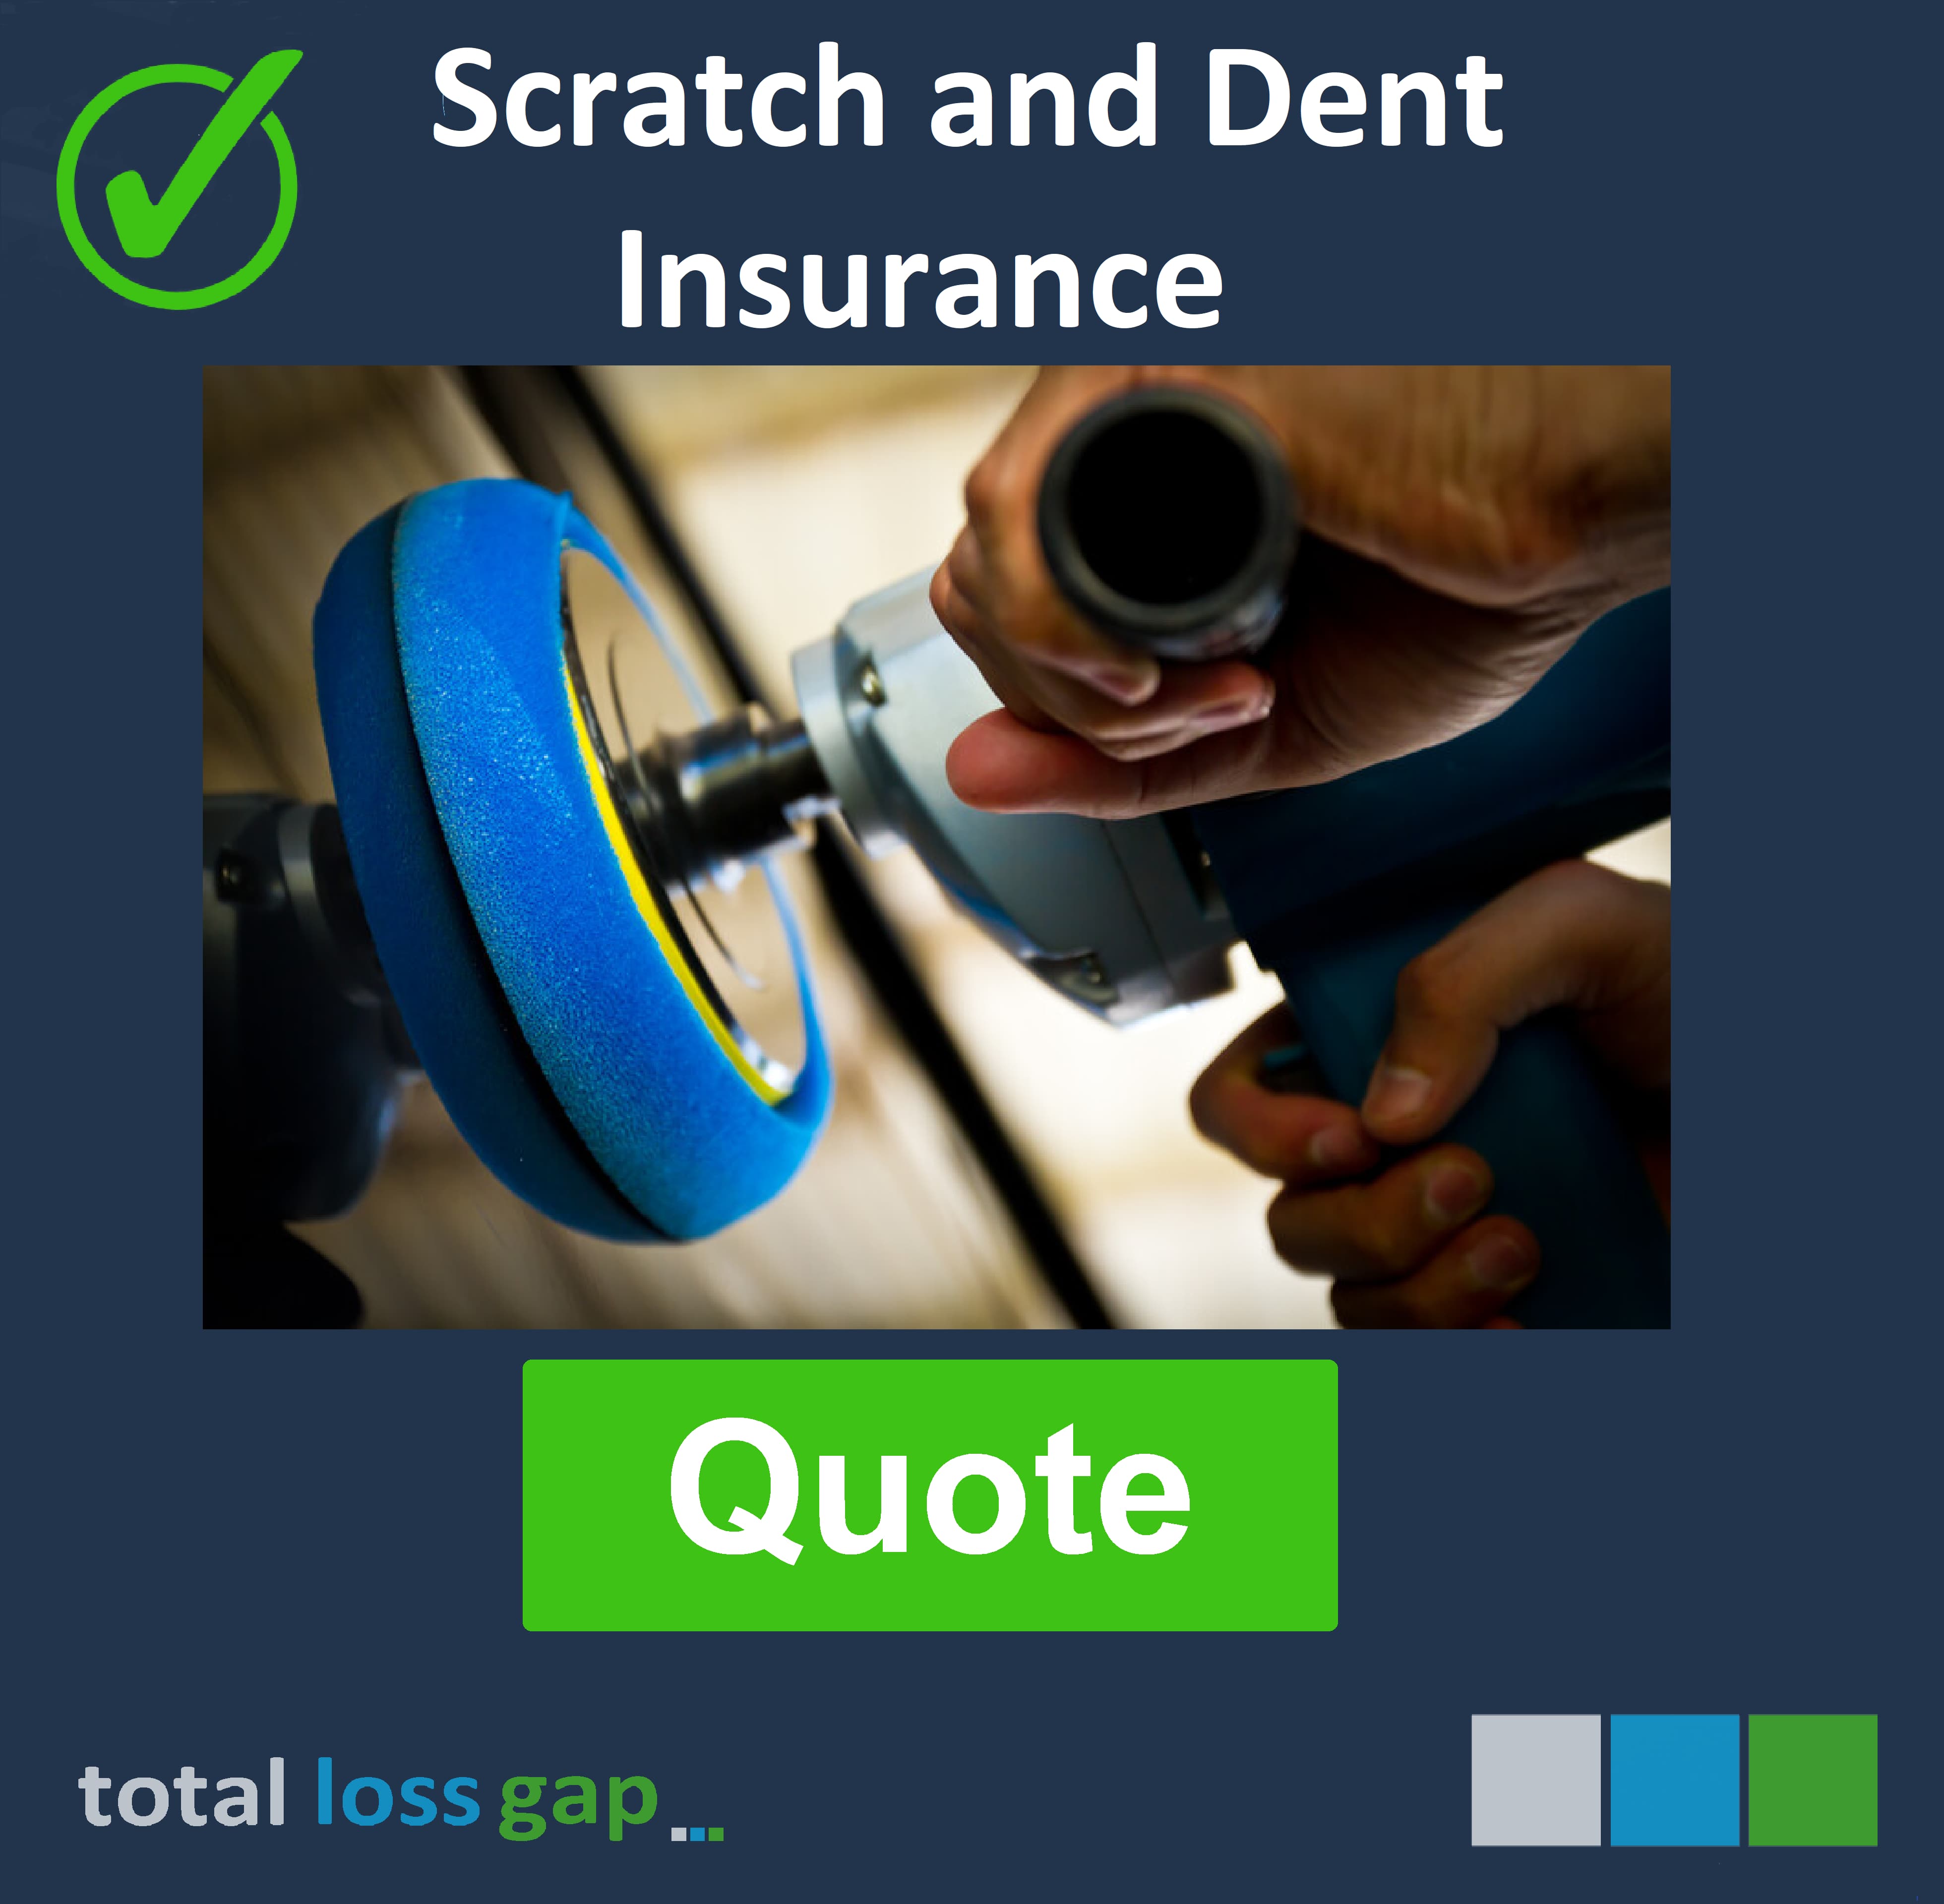 Scrath and Dent insurance for your Hyundai